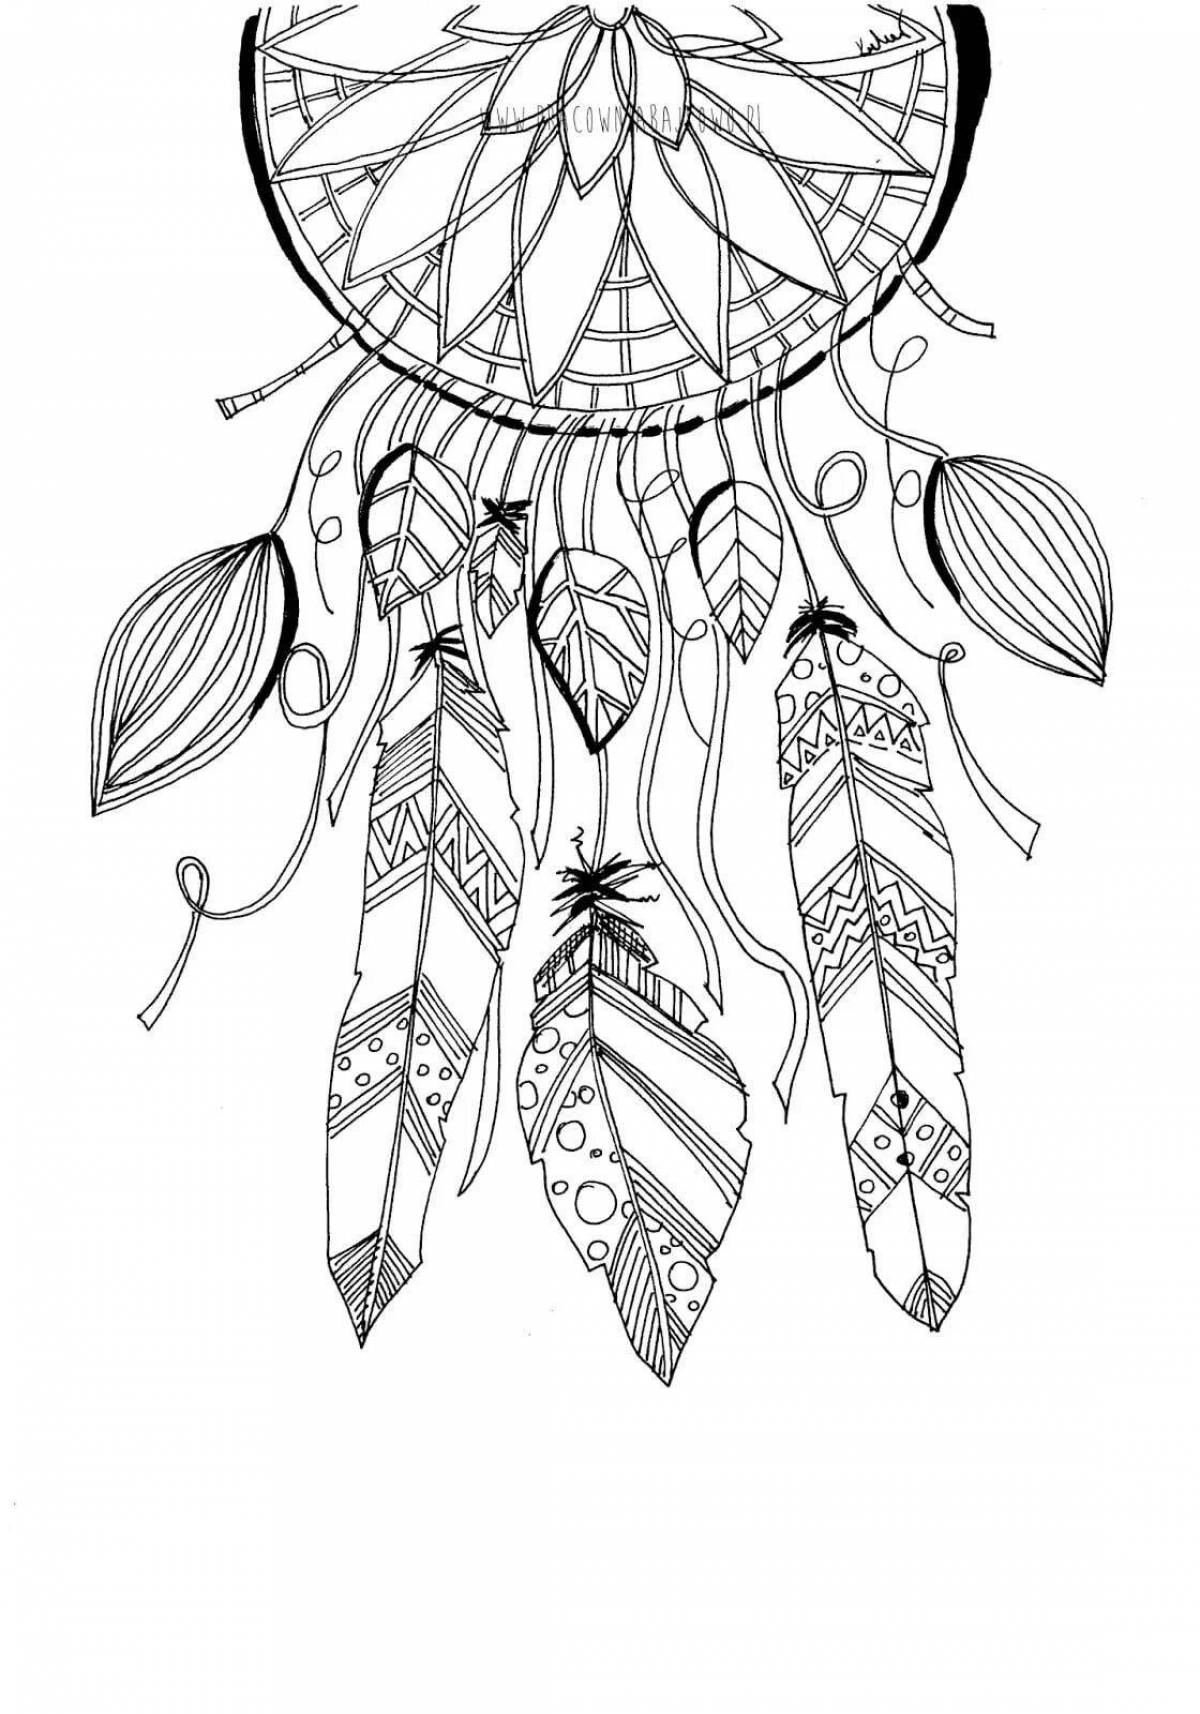 Animated coloring antistress dream catcher